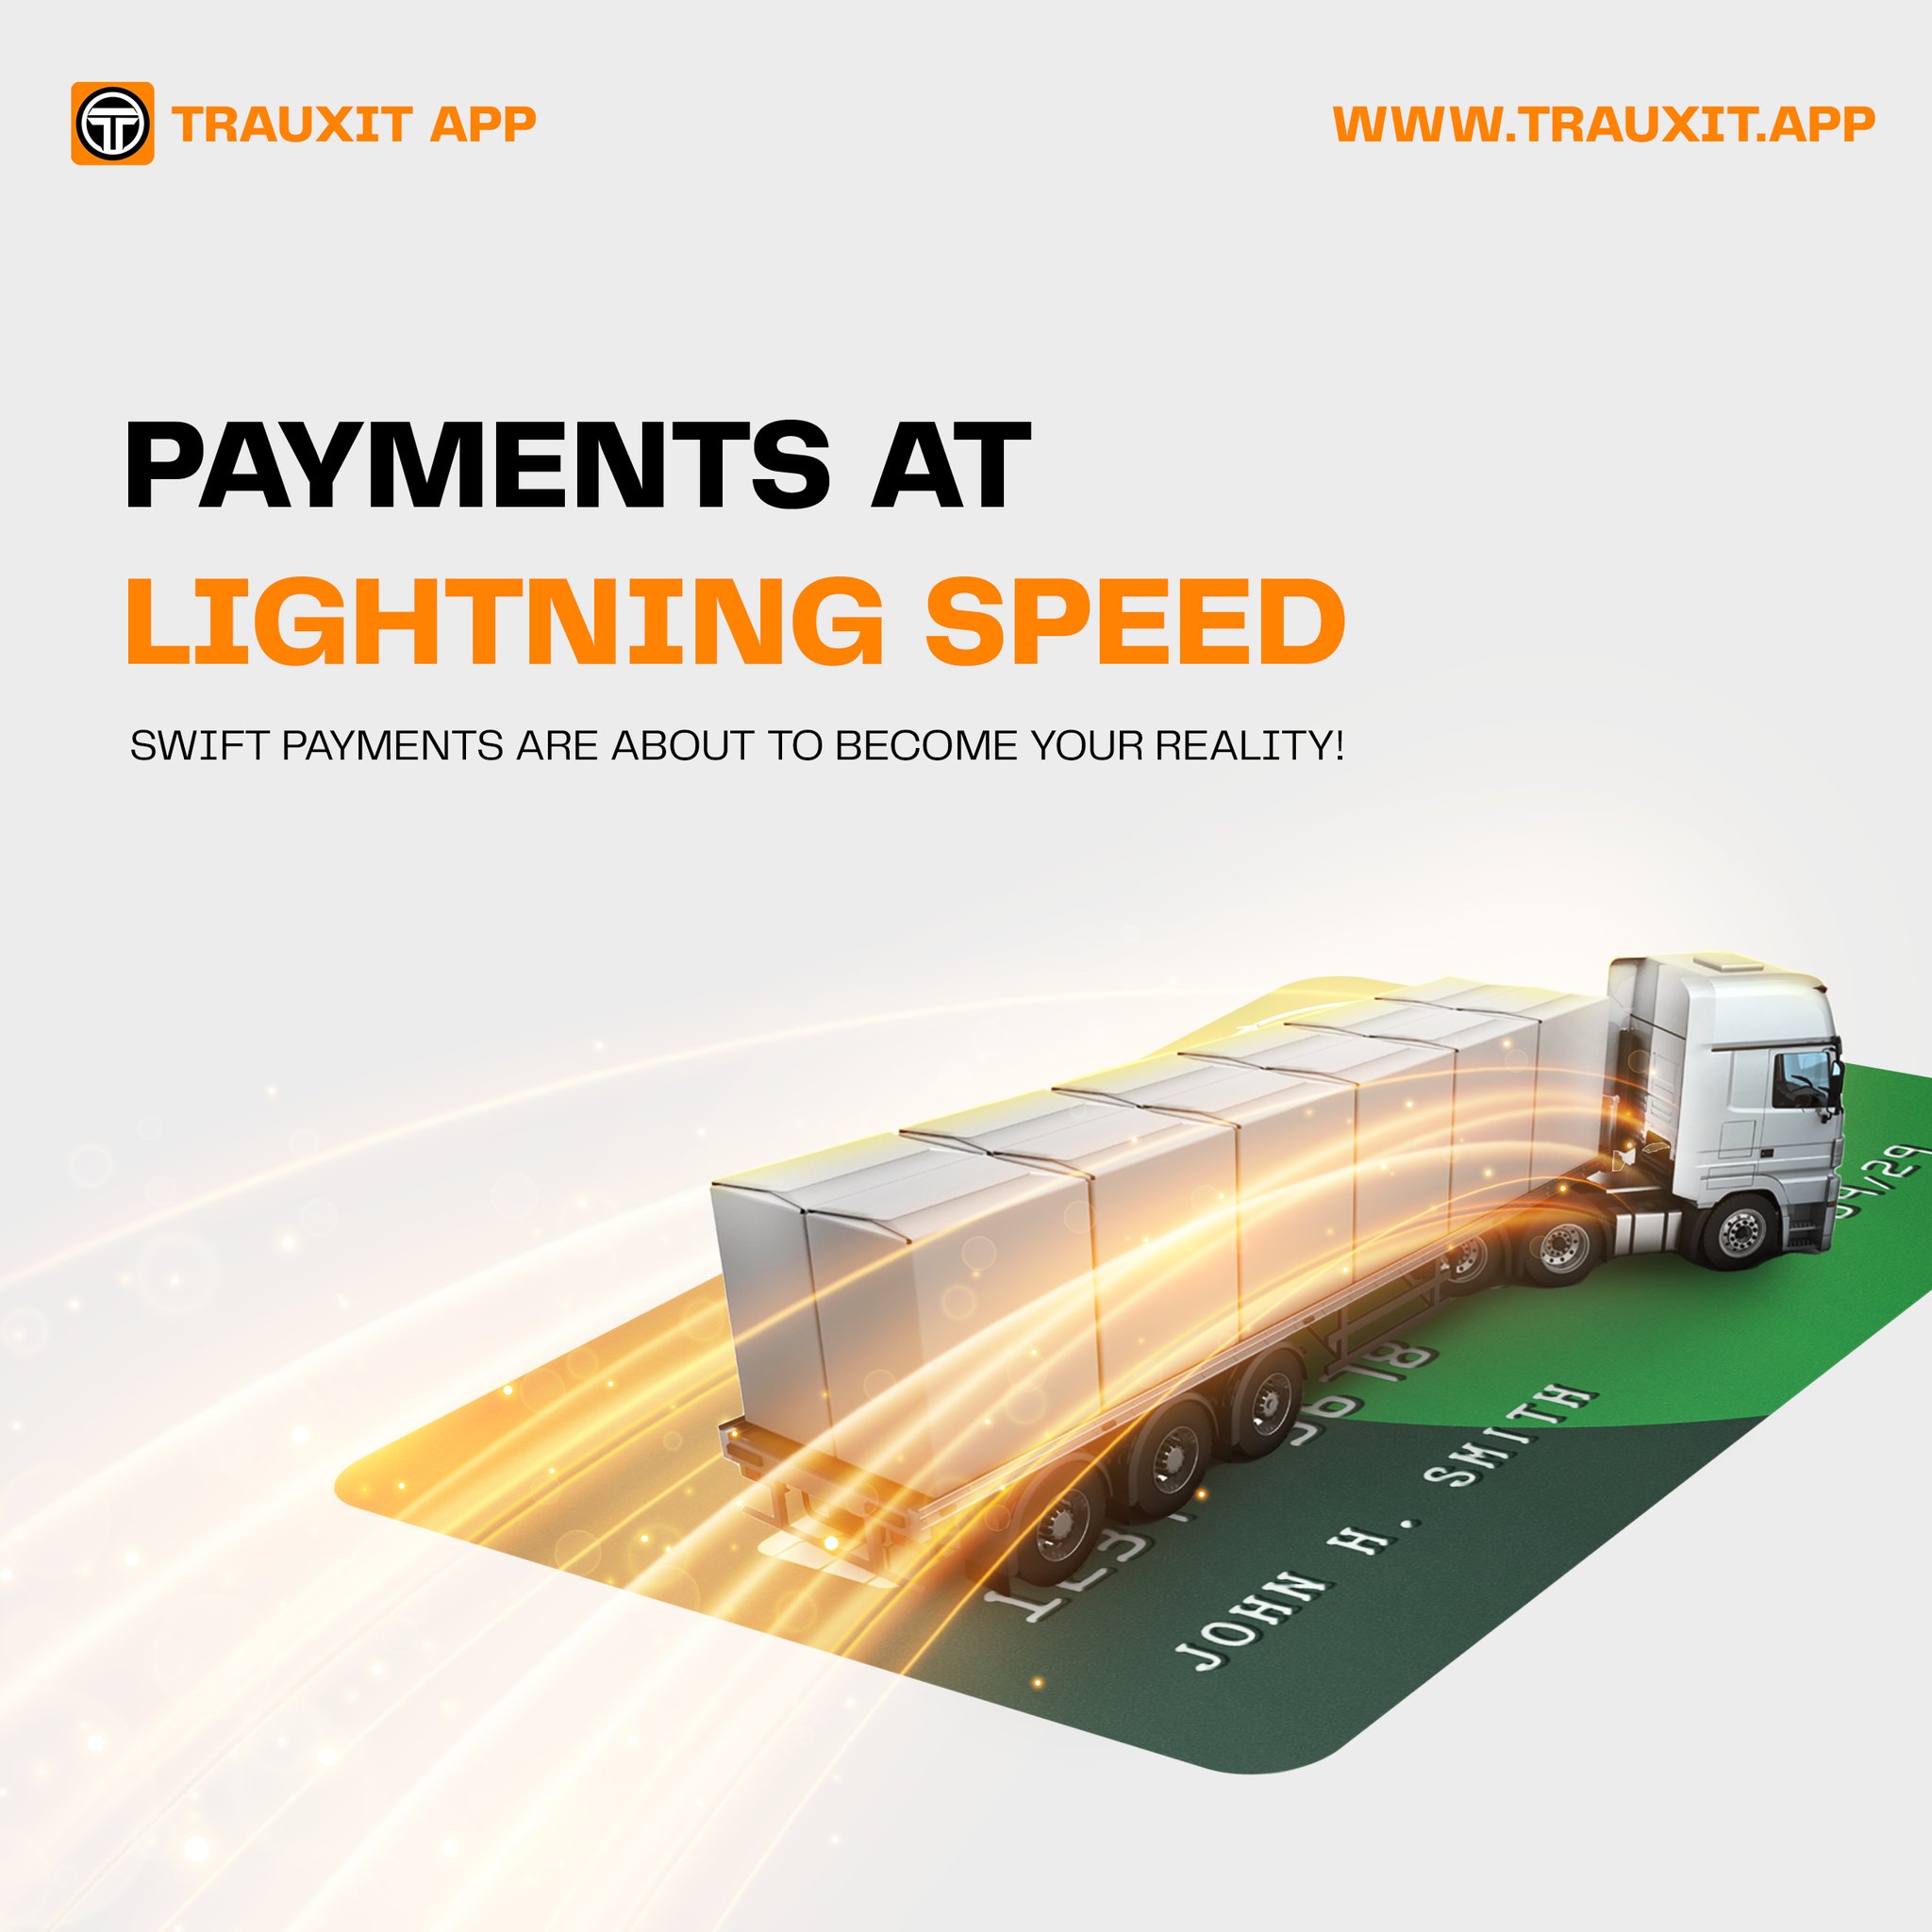 Transforming Freight Operations: Trauxit App Offers Speed, Simplicity, and Increased Earnings!